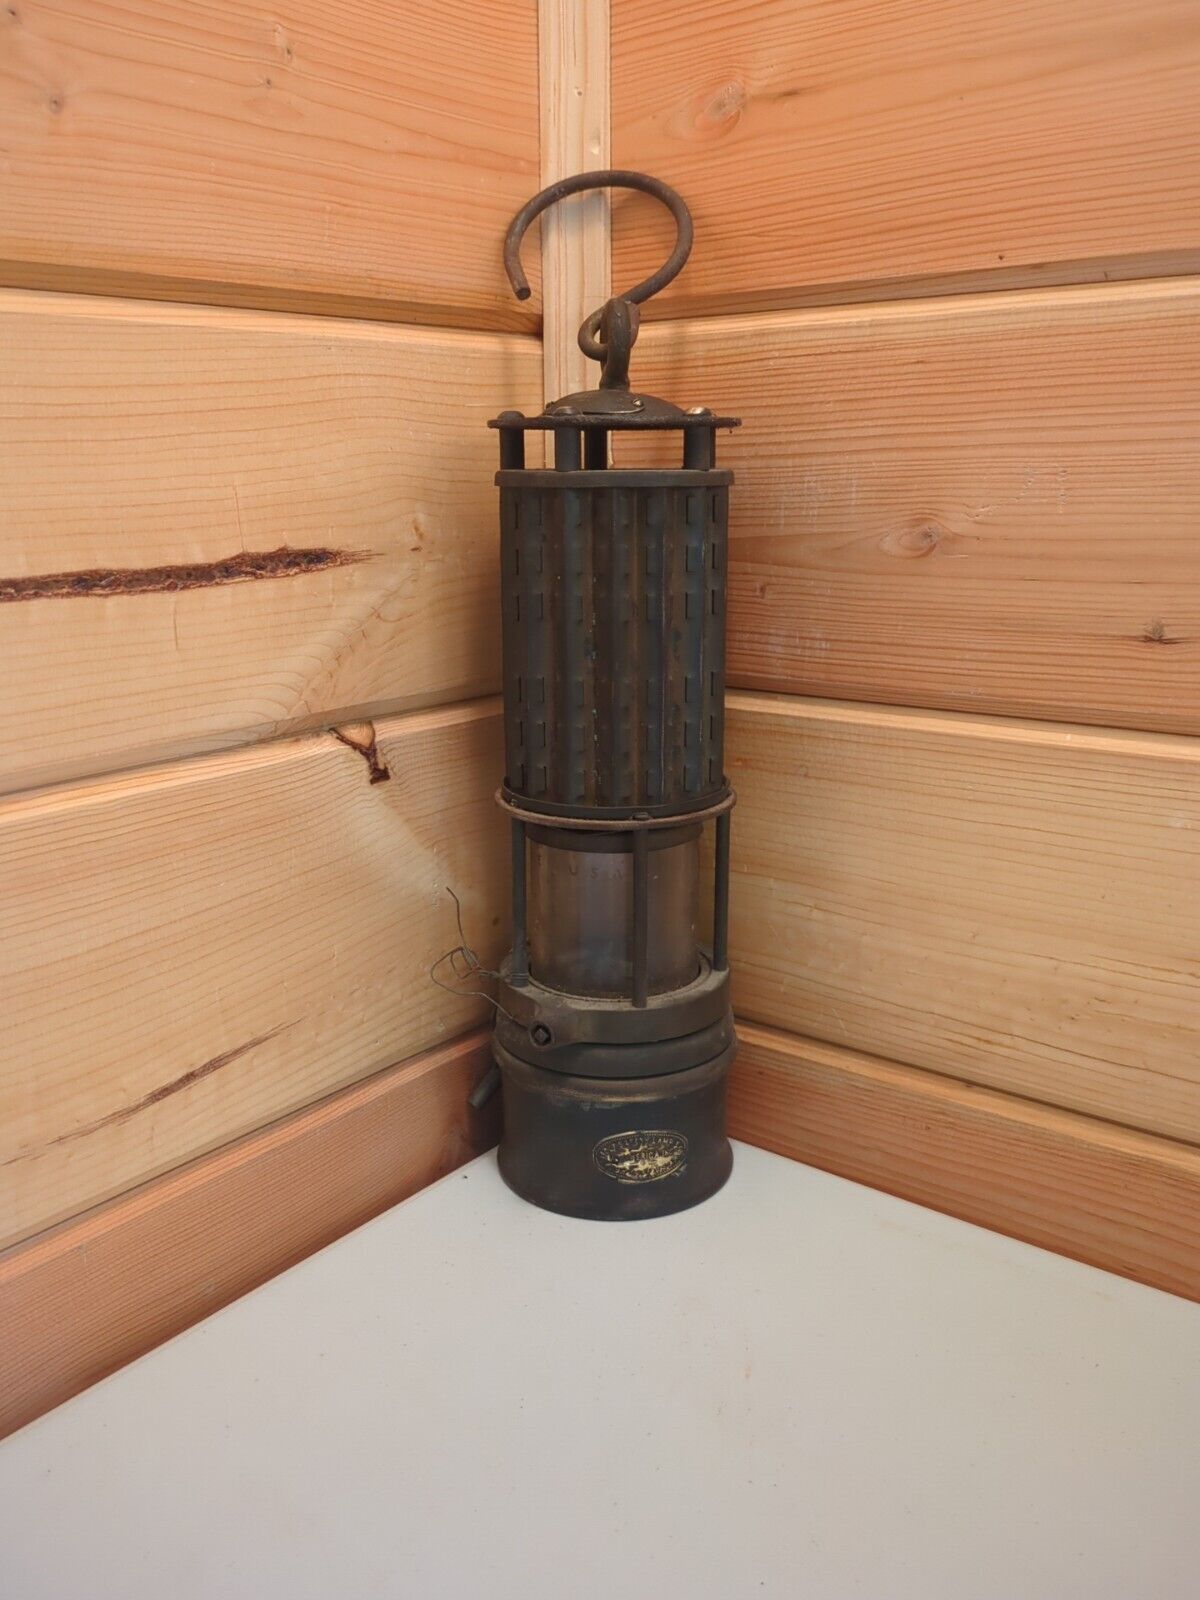 Wolfs Safety Lamp Company Vintage Miners Safety Lamp Coal Mining